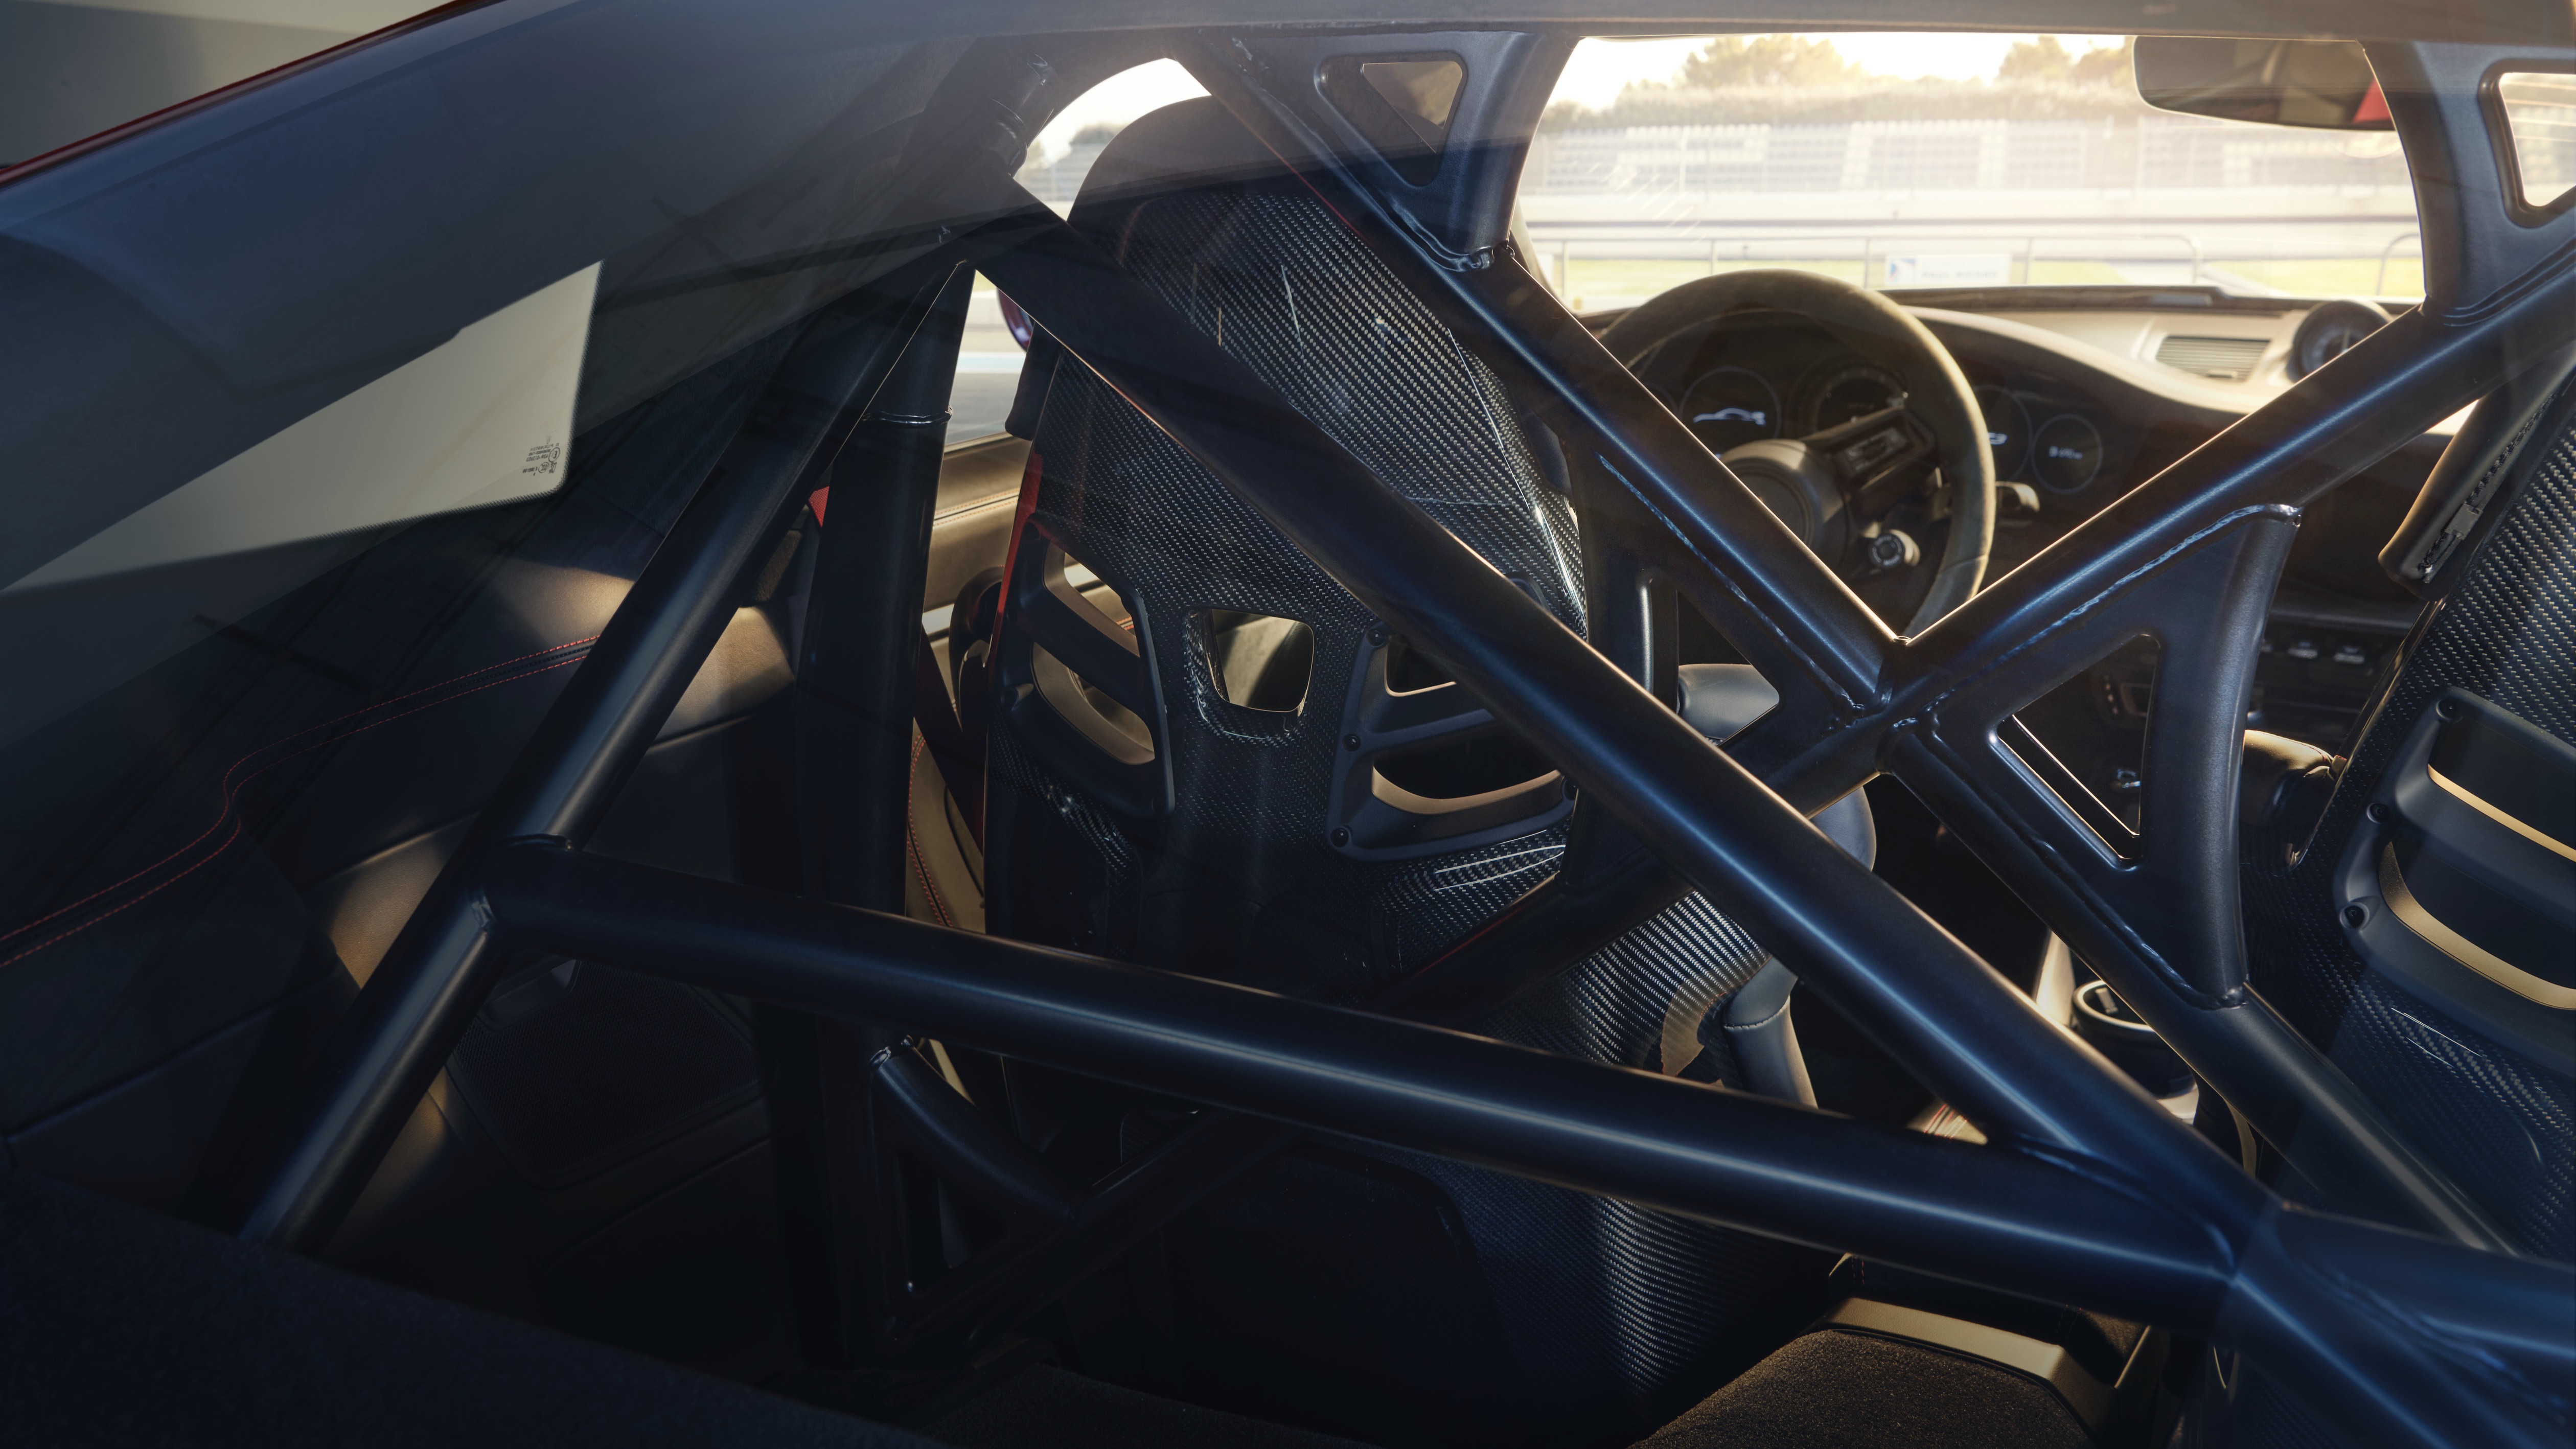 View of interior showing carbon fibre seats and rear struts